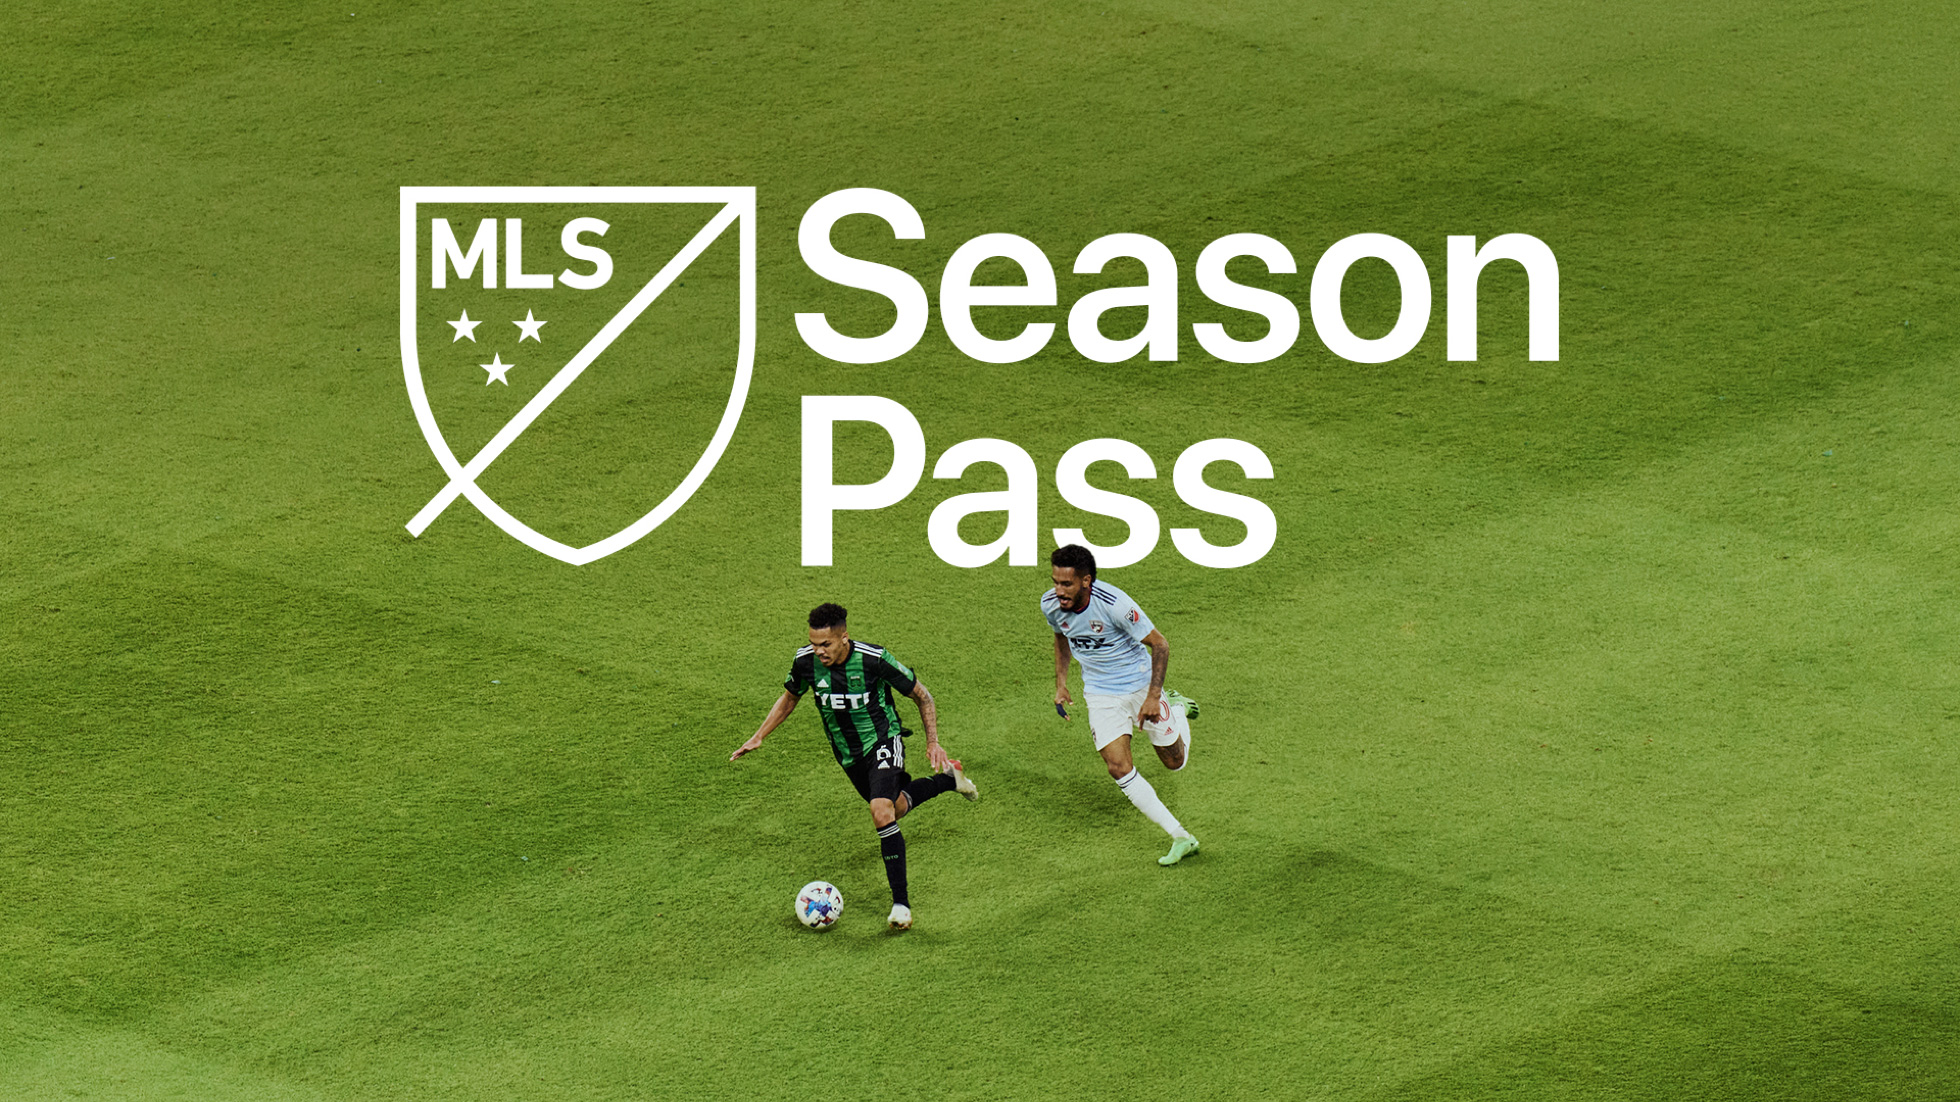 How to get Apple’s MLS Season Pass free from T-Mobile